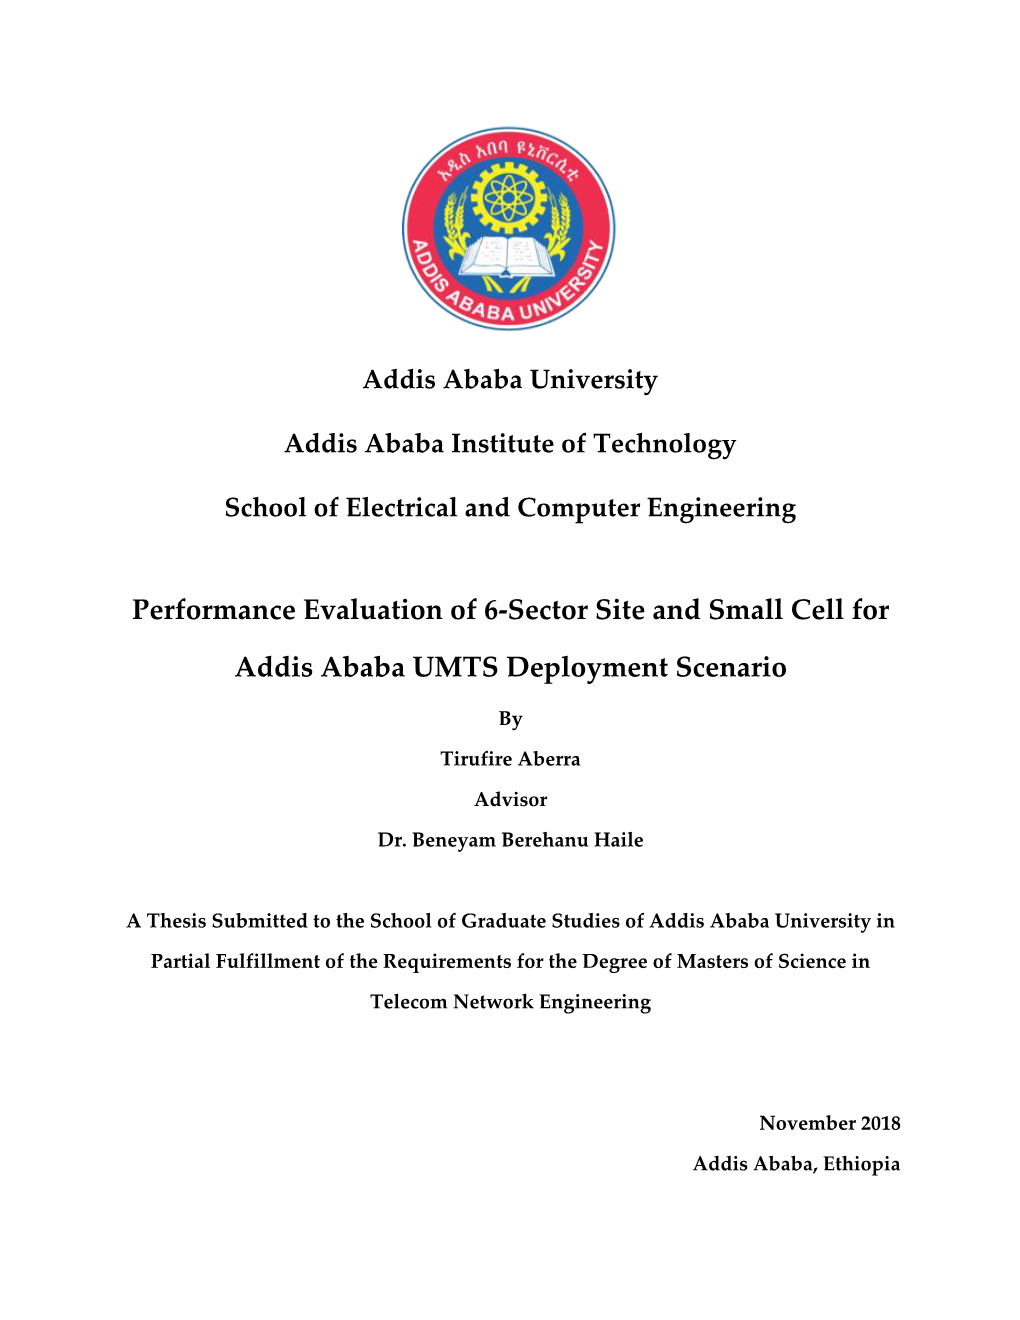 Performance Evaluation of 6-Sector Site and Small Cell for Addis Ababa